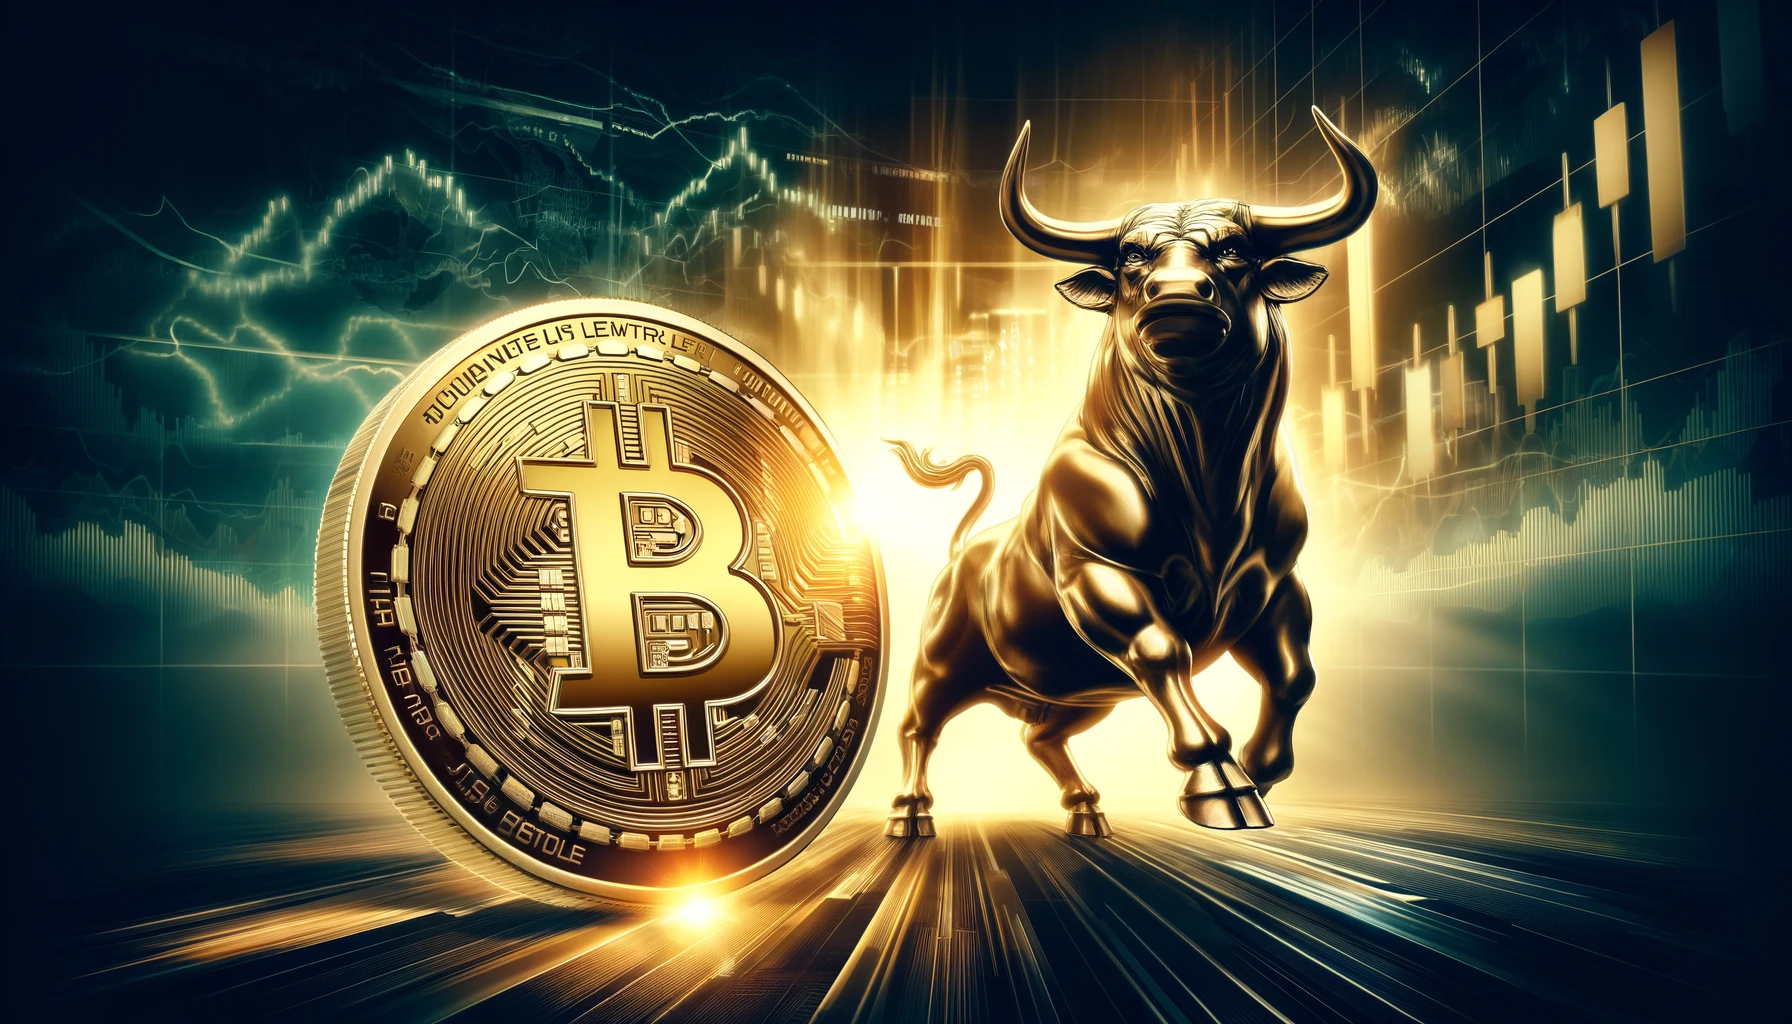 4 Key Reasons Why The Bitcoin Bull Run Is Far From Over